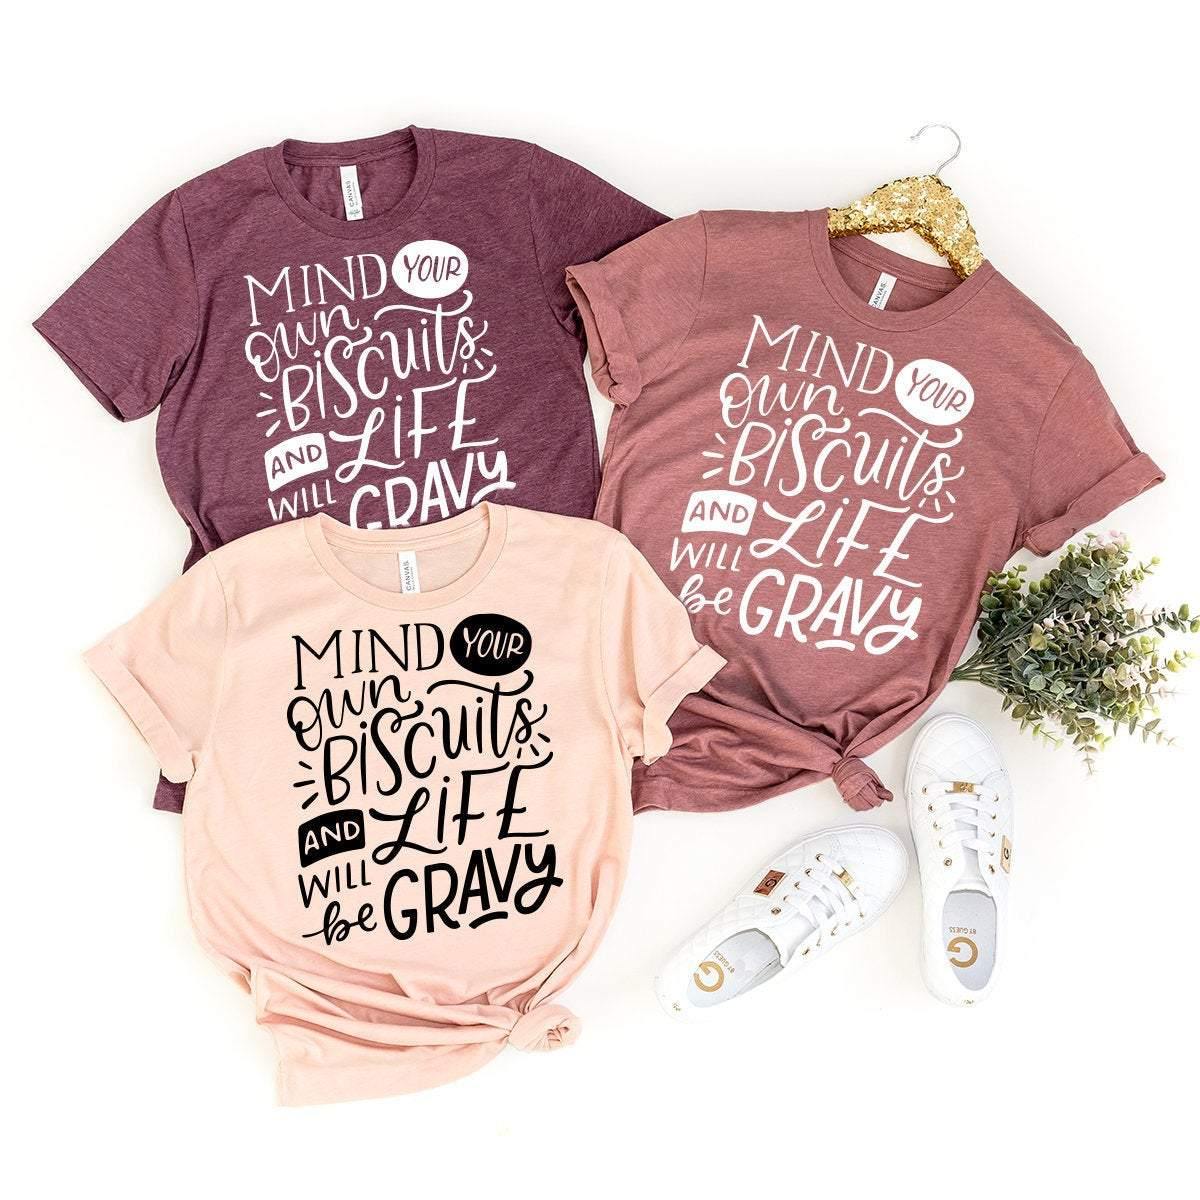 Country Shirt, Kacey Musgraves Shirt, Southern Women Shirt, Funny Women Tee, Mind Your Own Biscuits And Life Will Be Gravy Shirt, Music Gift - Fastdeliverytees.com